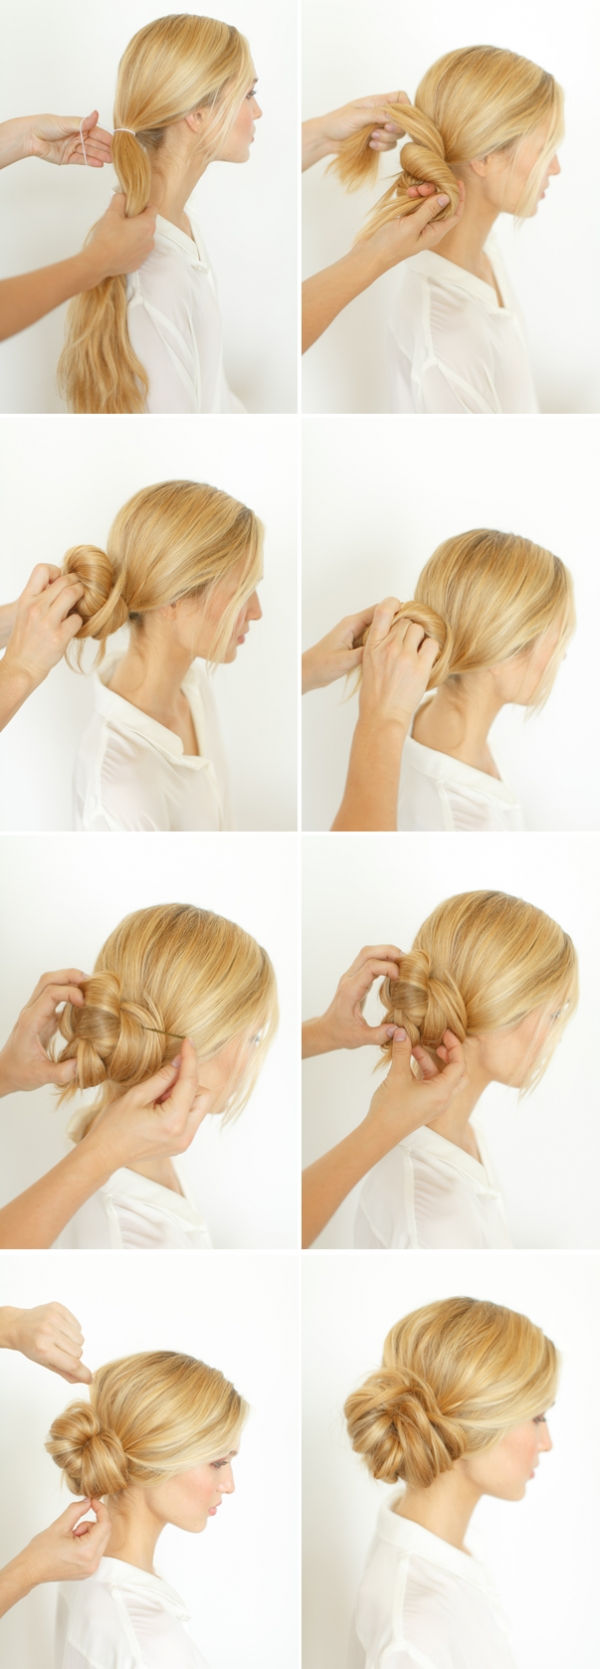 Knotted Bun Wedding Hairstyle